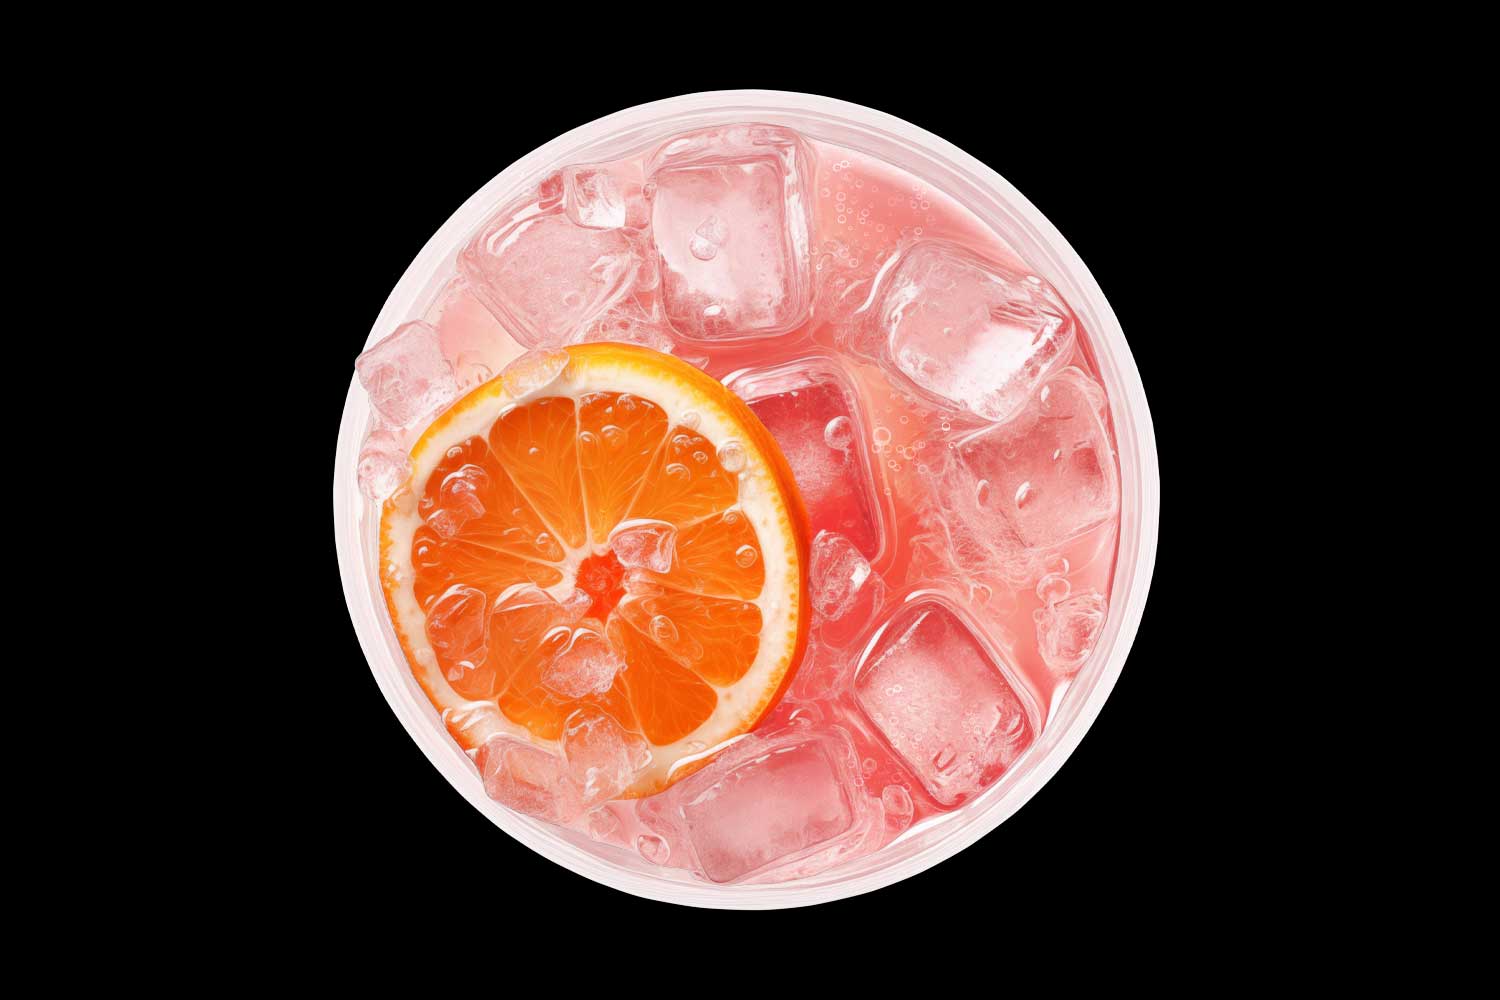 Light pink soda with ice cubes, shot from above on a black background.